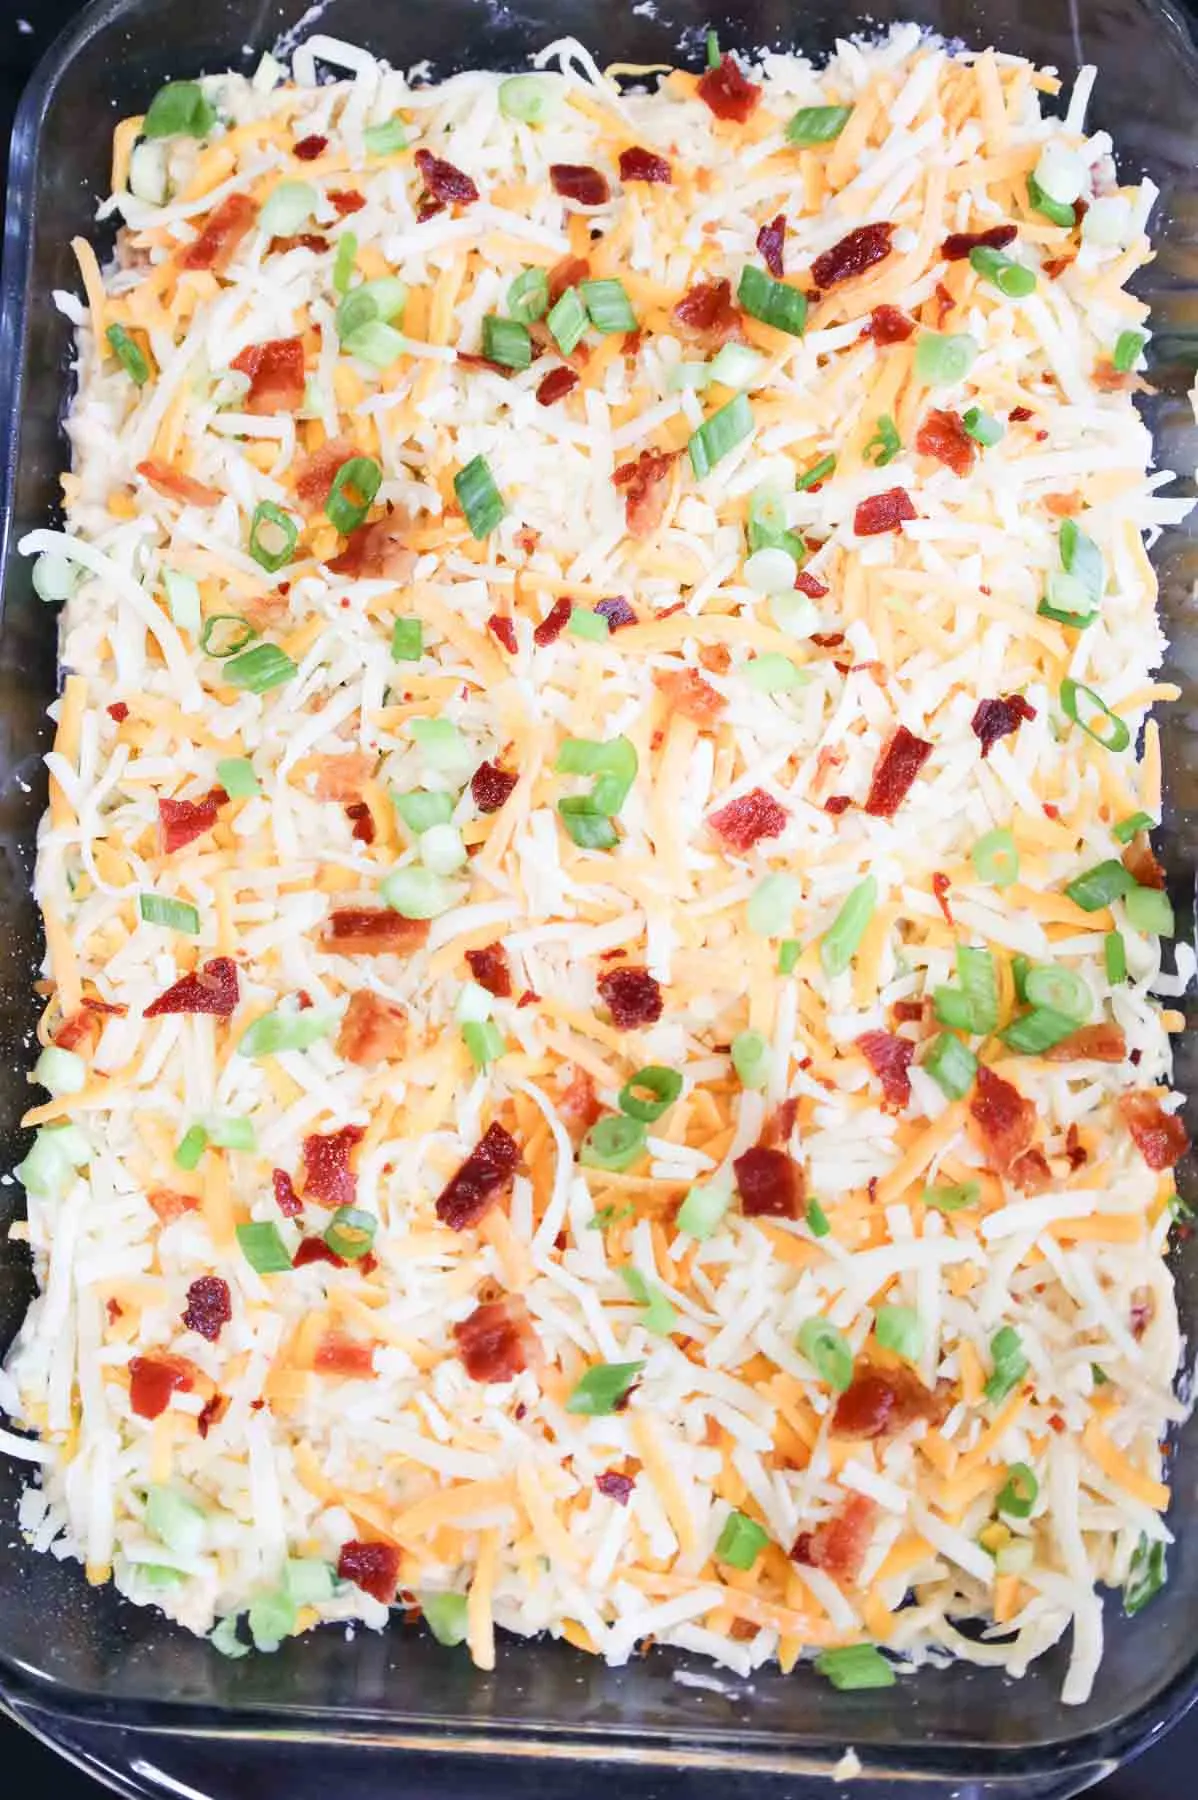 shredded cheese, green onions and bacon on top of chicken spaghetti in a baking dish